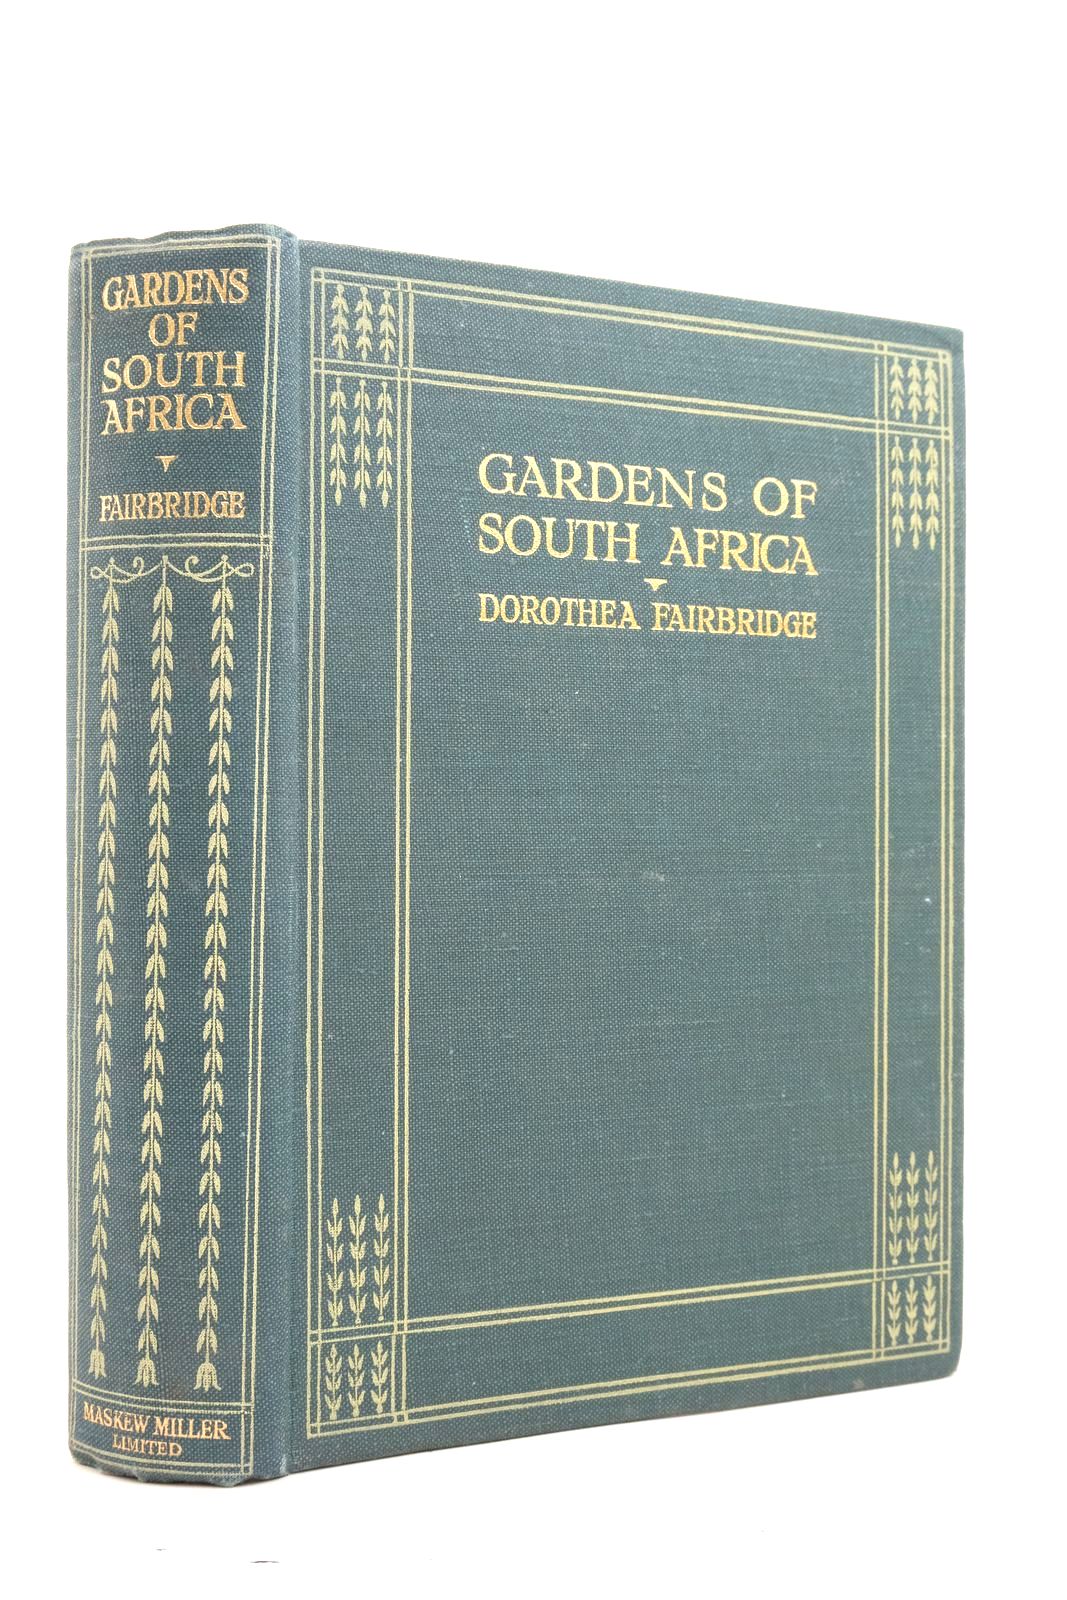 Photo of GARDENS OF SOUTH AFRICA written by Fairbridge, Dorothea illustrated by Drake, Elizabeth Driscoll, Ethel Barter, E. published by T. Maskew Miller (STOCK CODE: 2137418)  for sale by Stella & Rose's Books